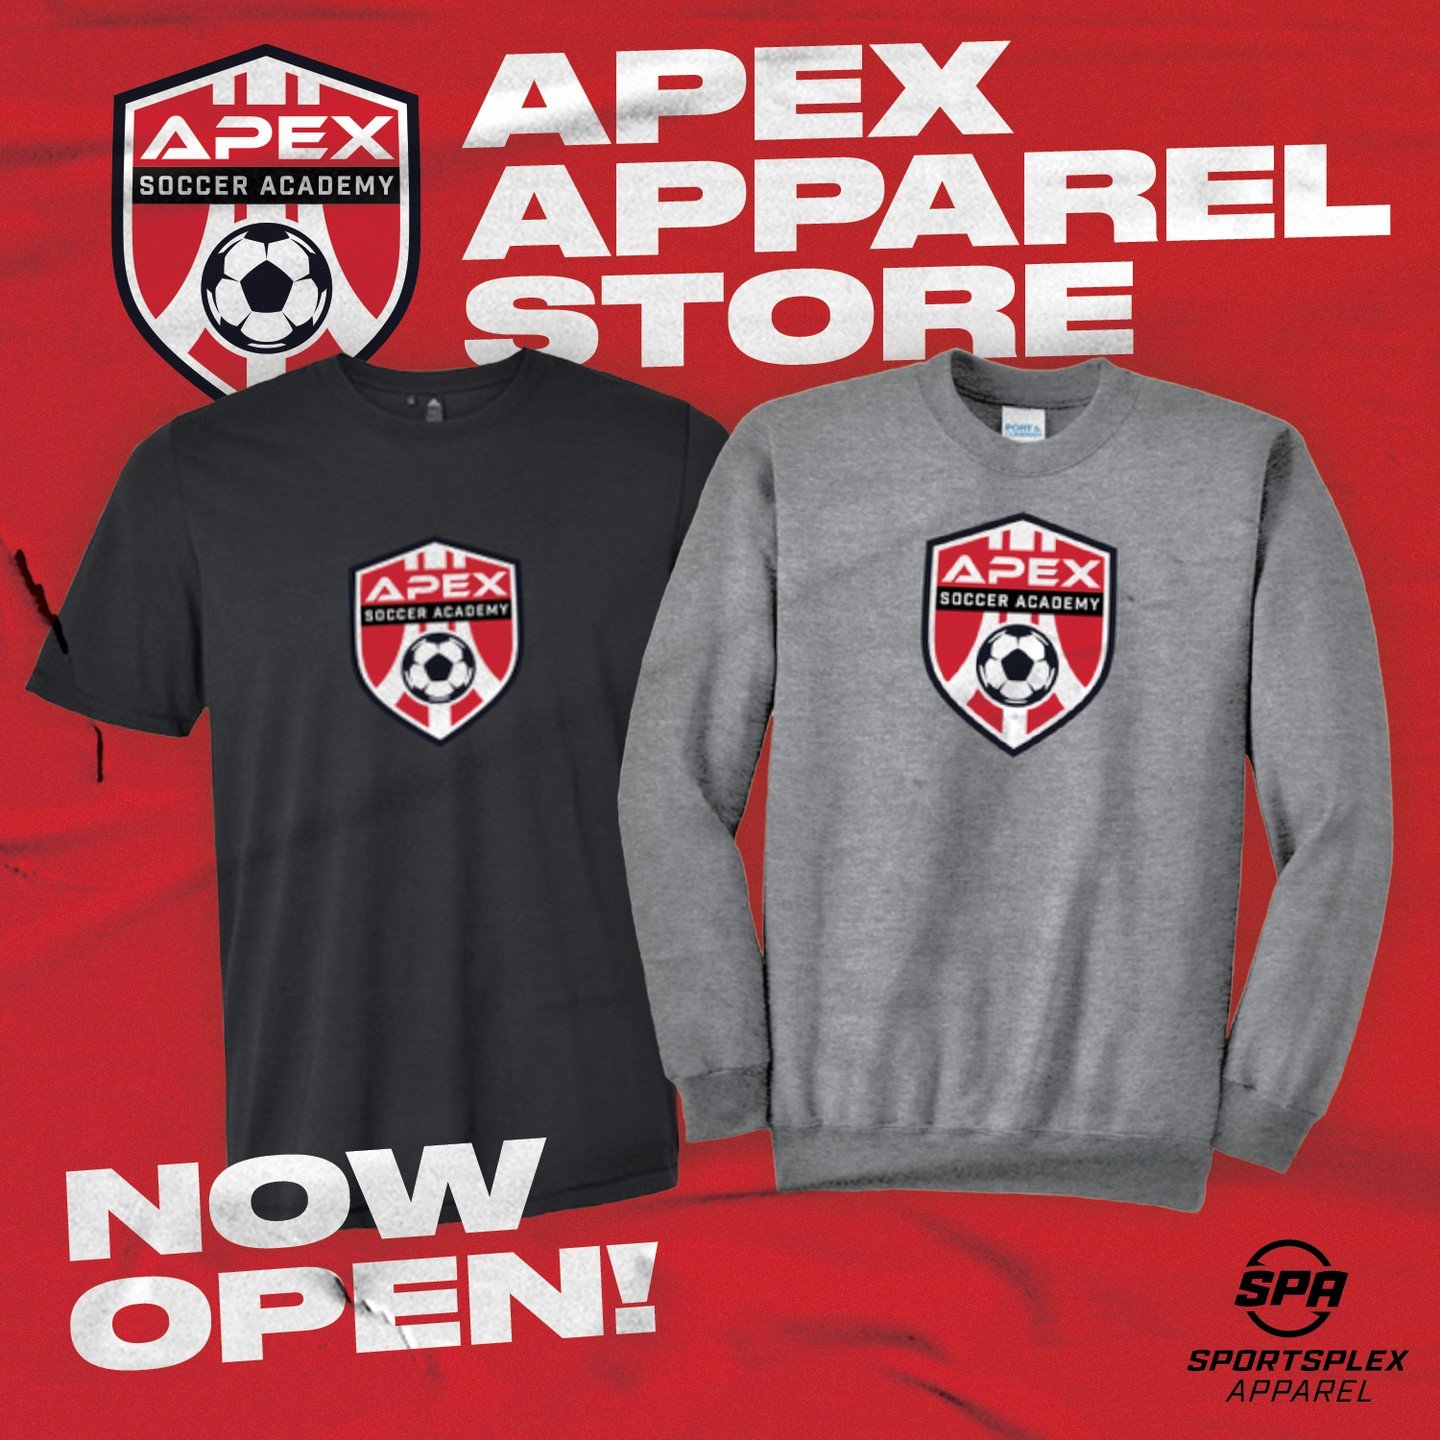 Check out the fresh new look at the Apex Soccer Academy apparel store! Gear up with our latest logo for the upcoming seasons ⚽️

Don't miss out&mdash;place your orders before April 30th! 

https://apex-soccer-spring-24.itemorder.com/shop/home/

#Apex